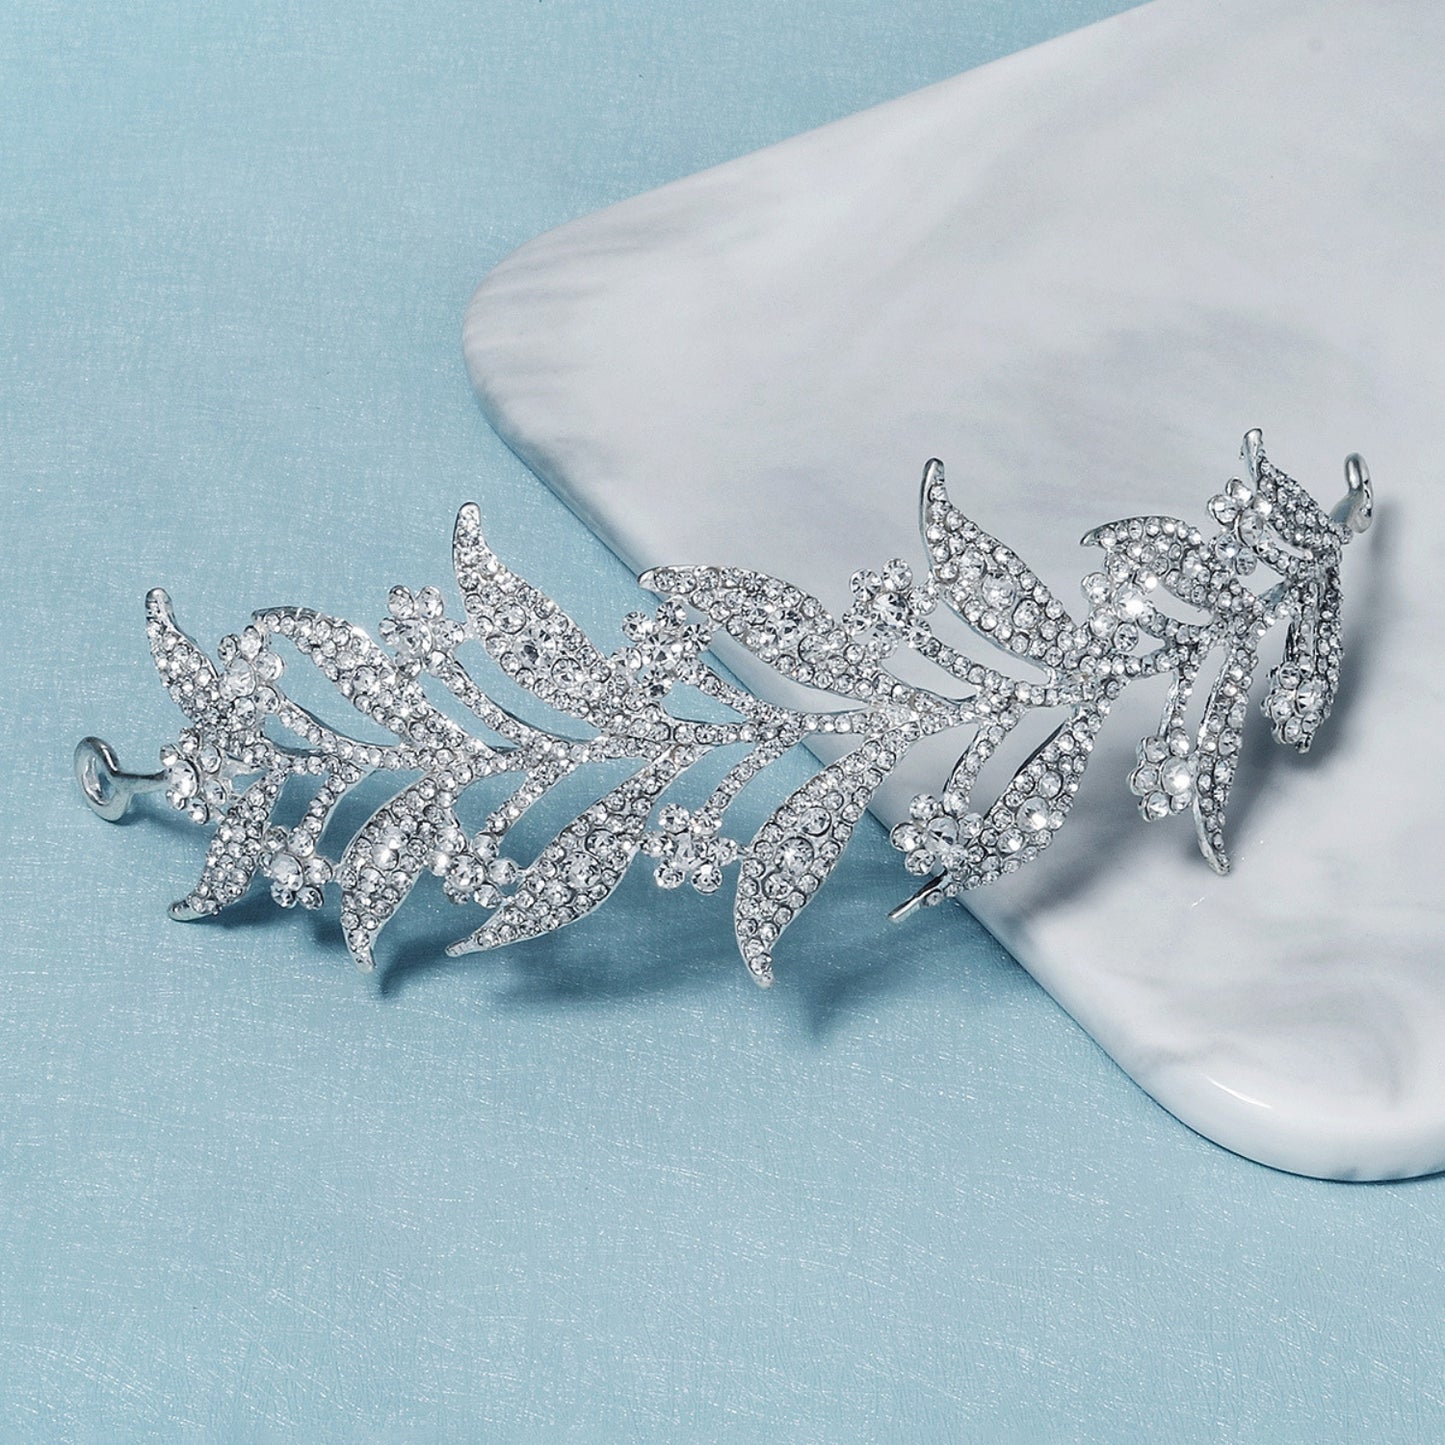 Crystal Crown Tiara for Women, Silver Vintage Queen Crown for Wedding Brides, Princess Tiara Crown for Girls Halloween Costume and Birthday Party -Silver